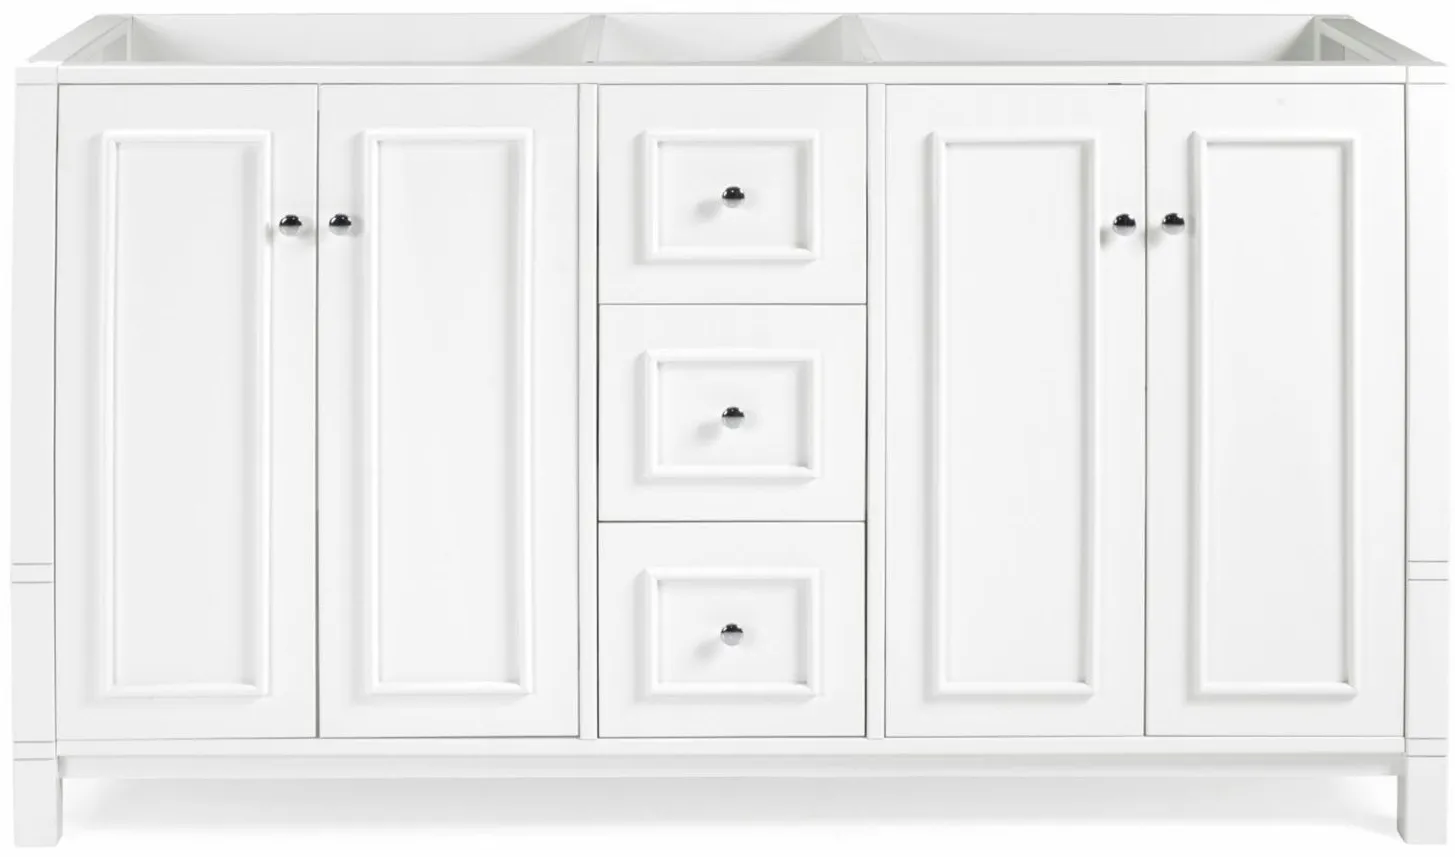 Williamsburg 60" Vanity Cabinet in White by Bolton Furniture